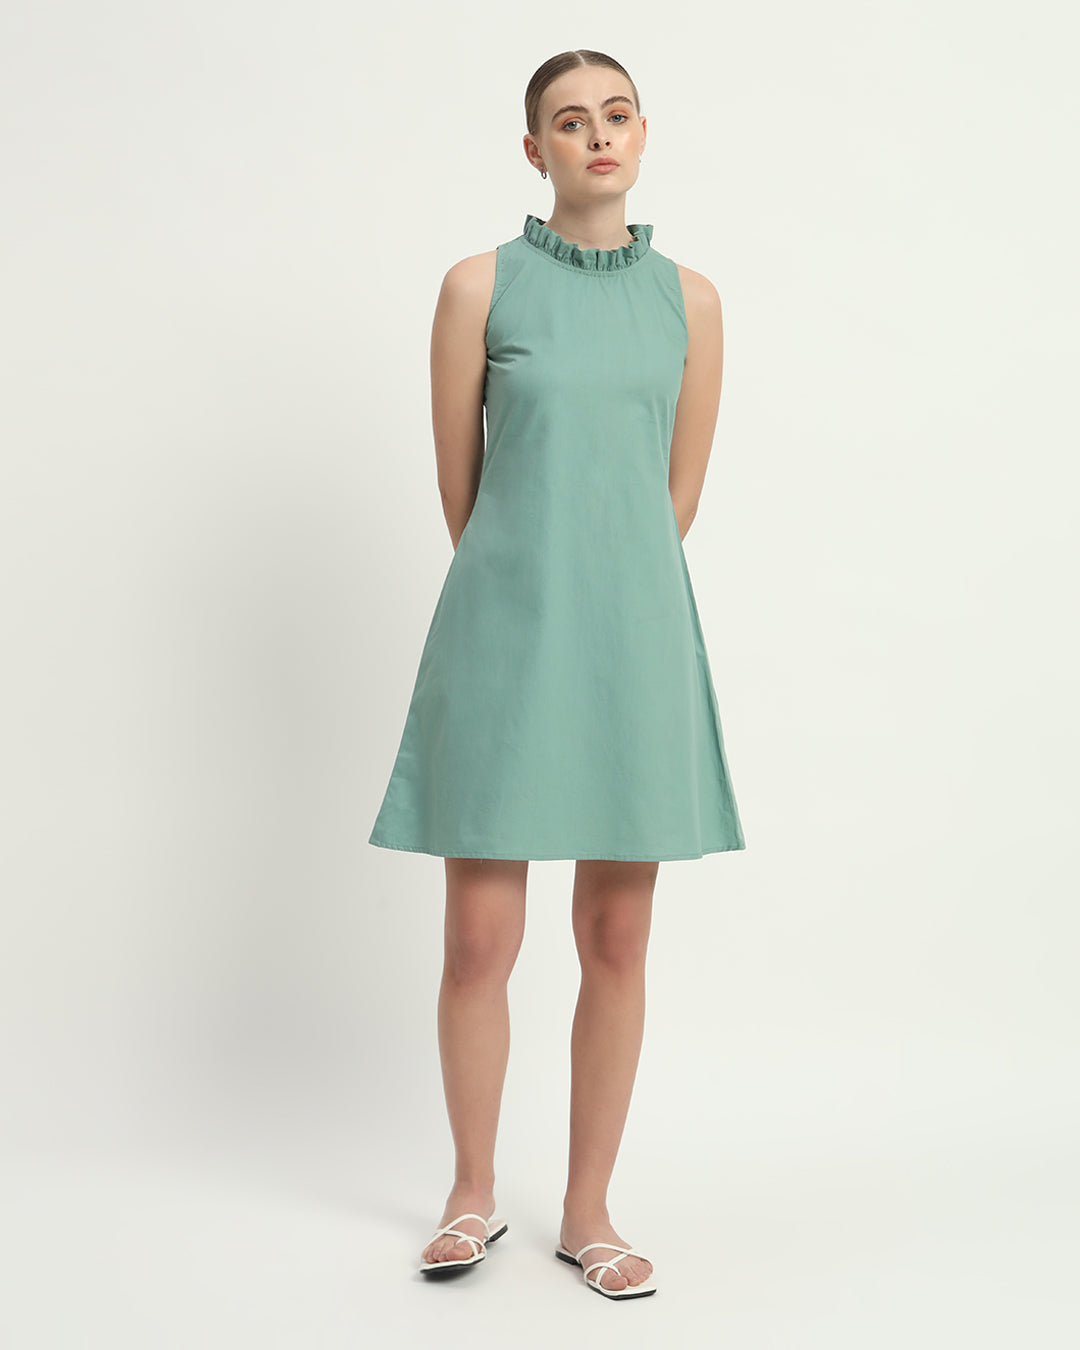 The Mint Angelica Cotton Dress